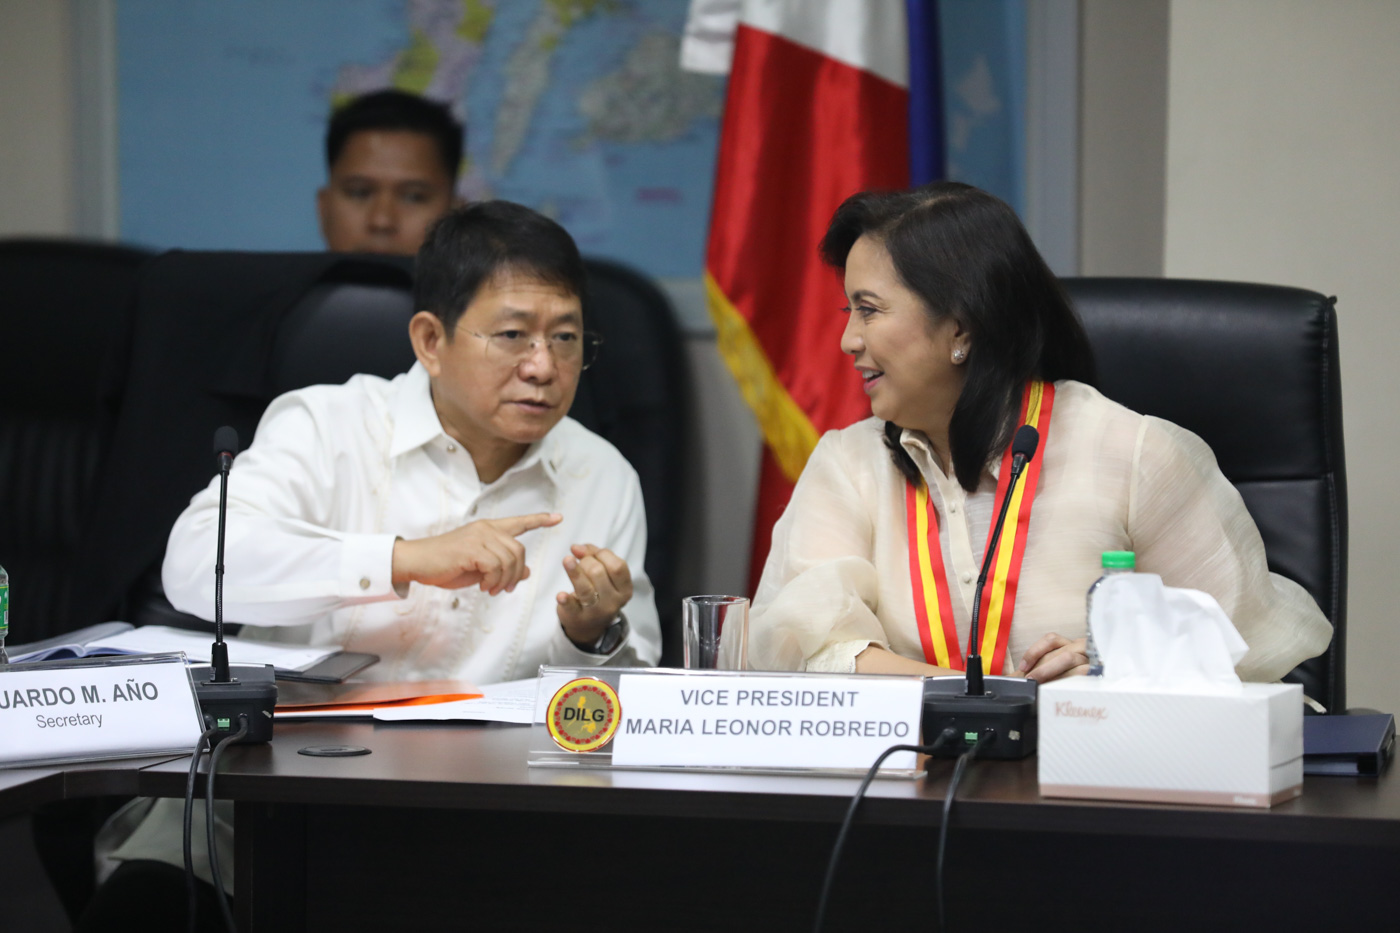 NEED TO KNOW. While the Department of the Interior and Local Government was open to giving Vice President Leni Robredo information on the anti-drug campaign, Interior Secretary Eduardo Año allowed it on a need-to-know basis. Photo by Jay Ganzon/OVP